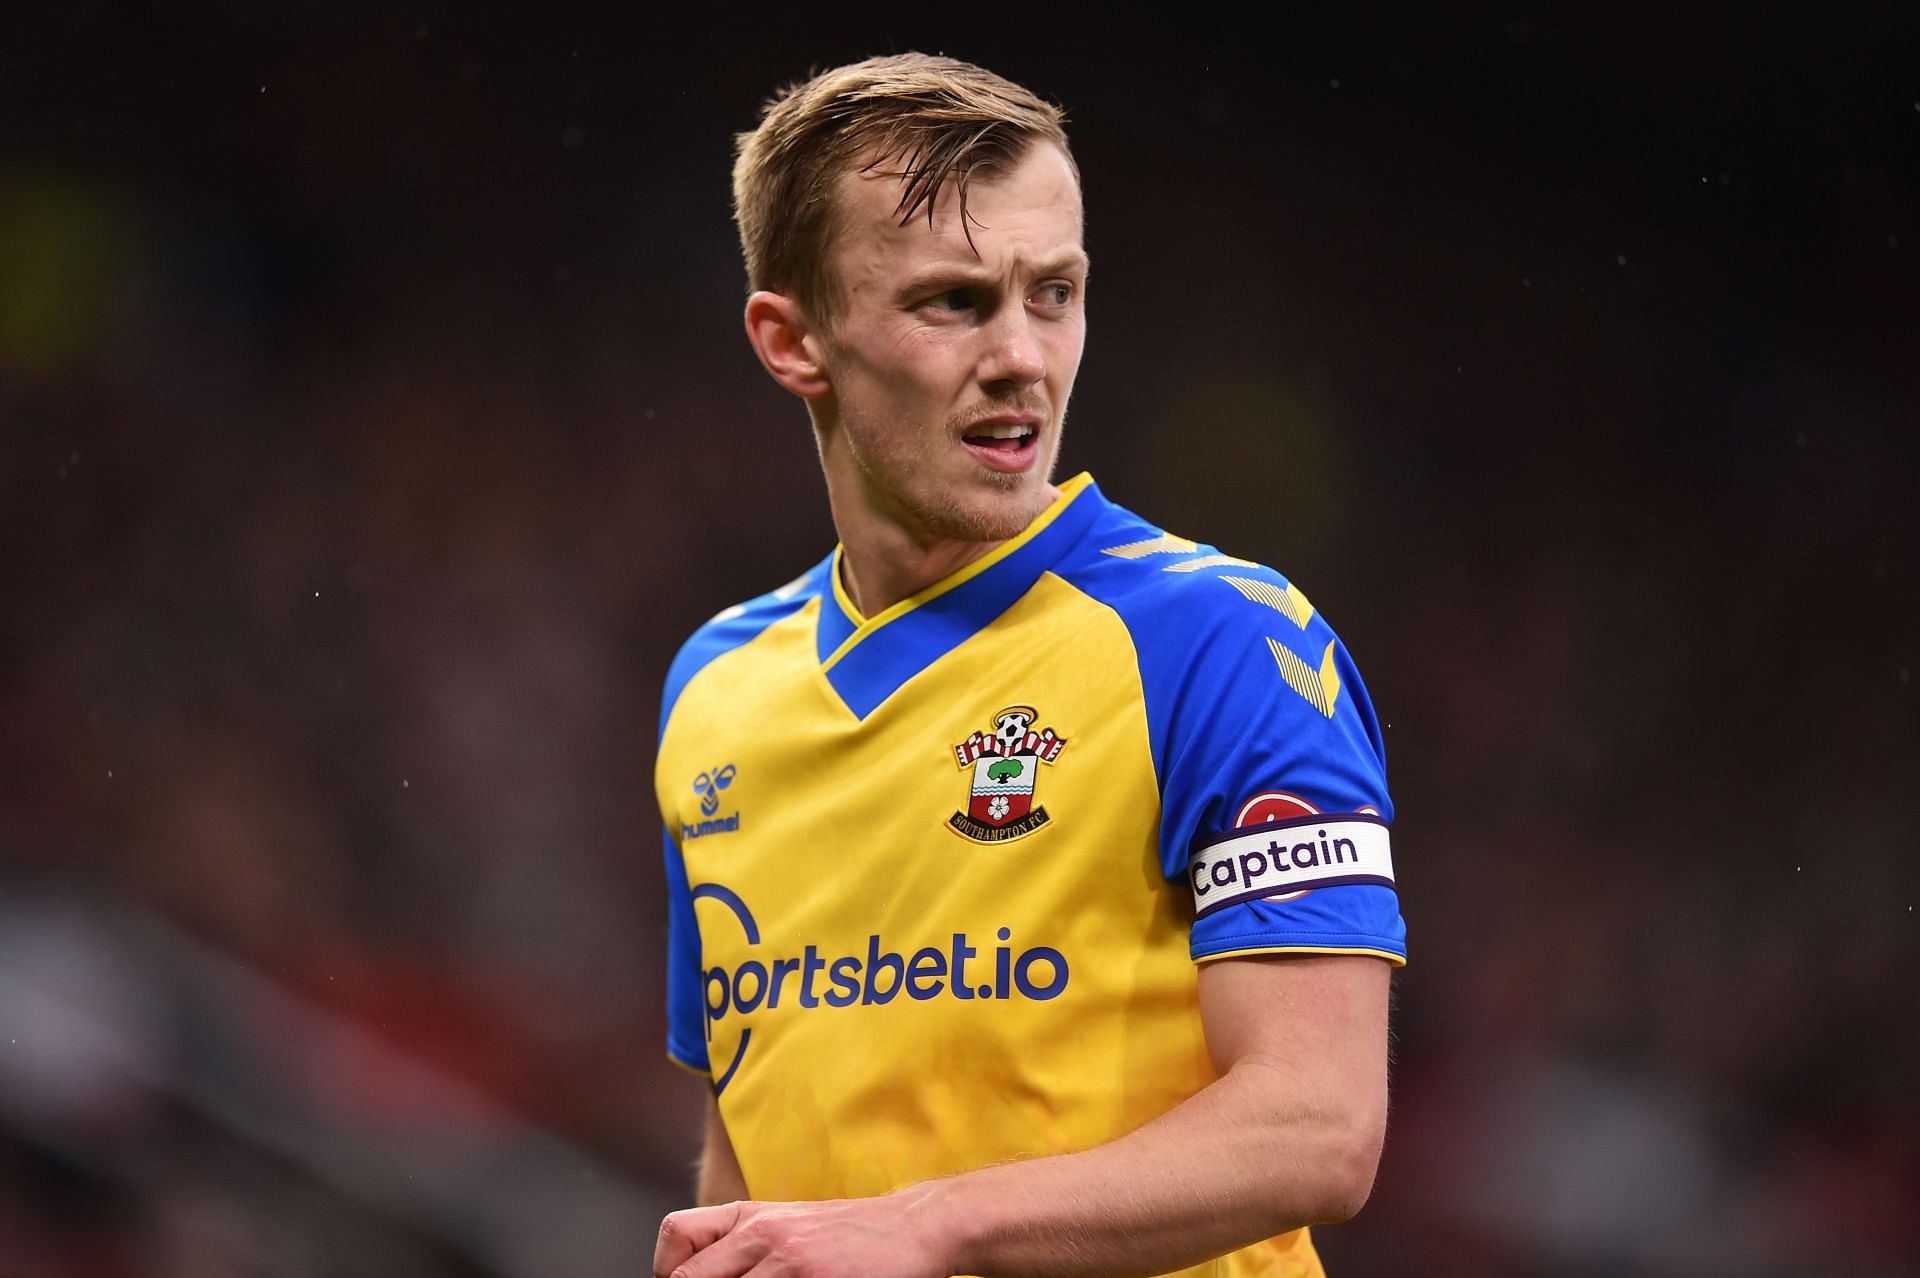 Ward-Prowse has done all he can this season